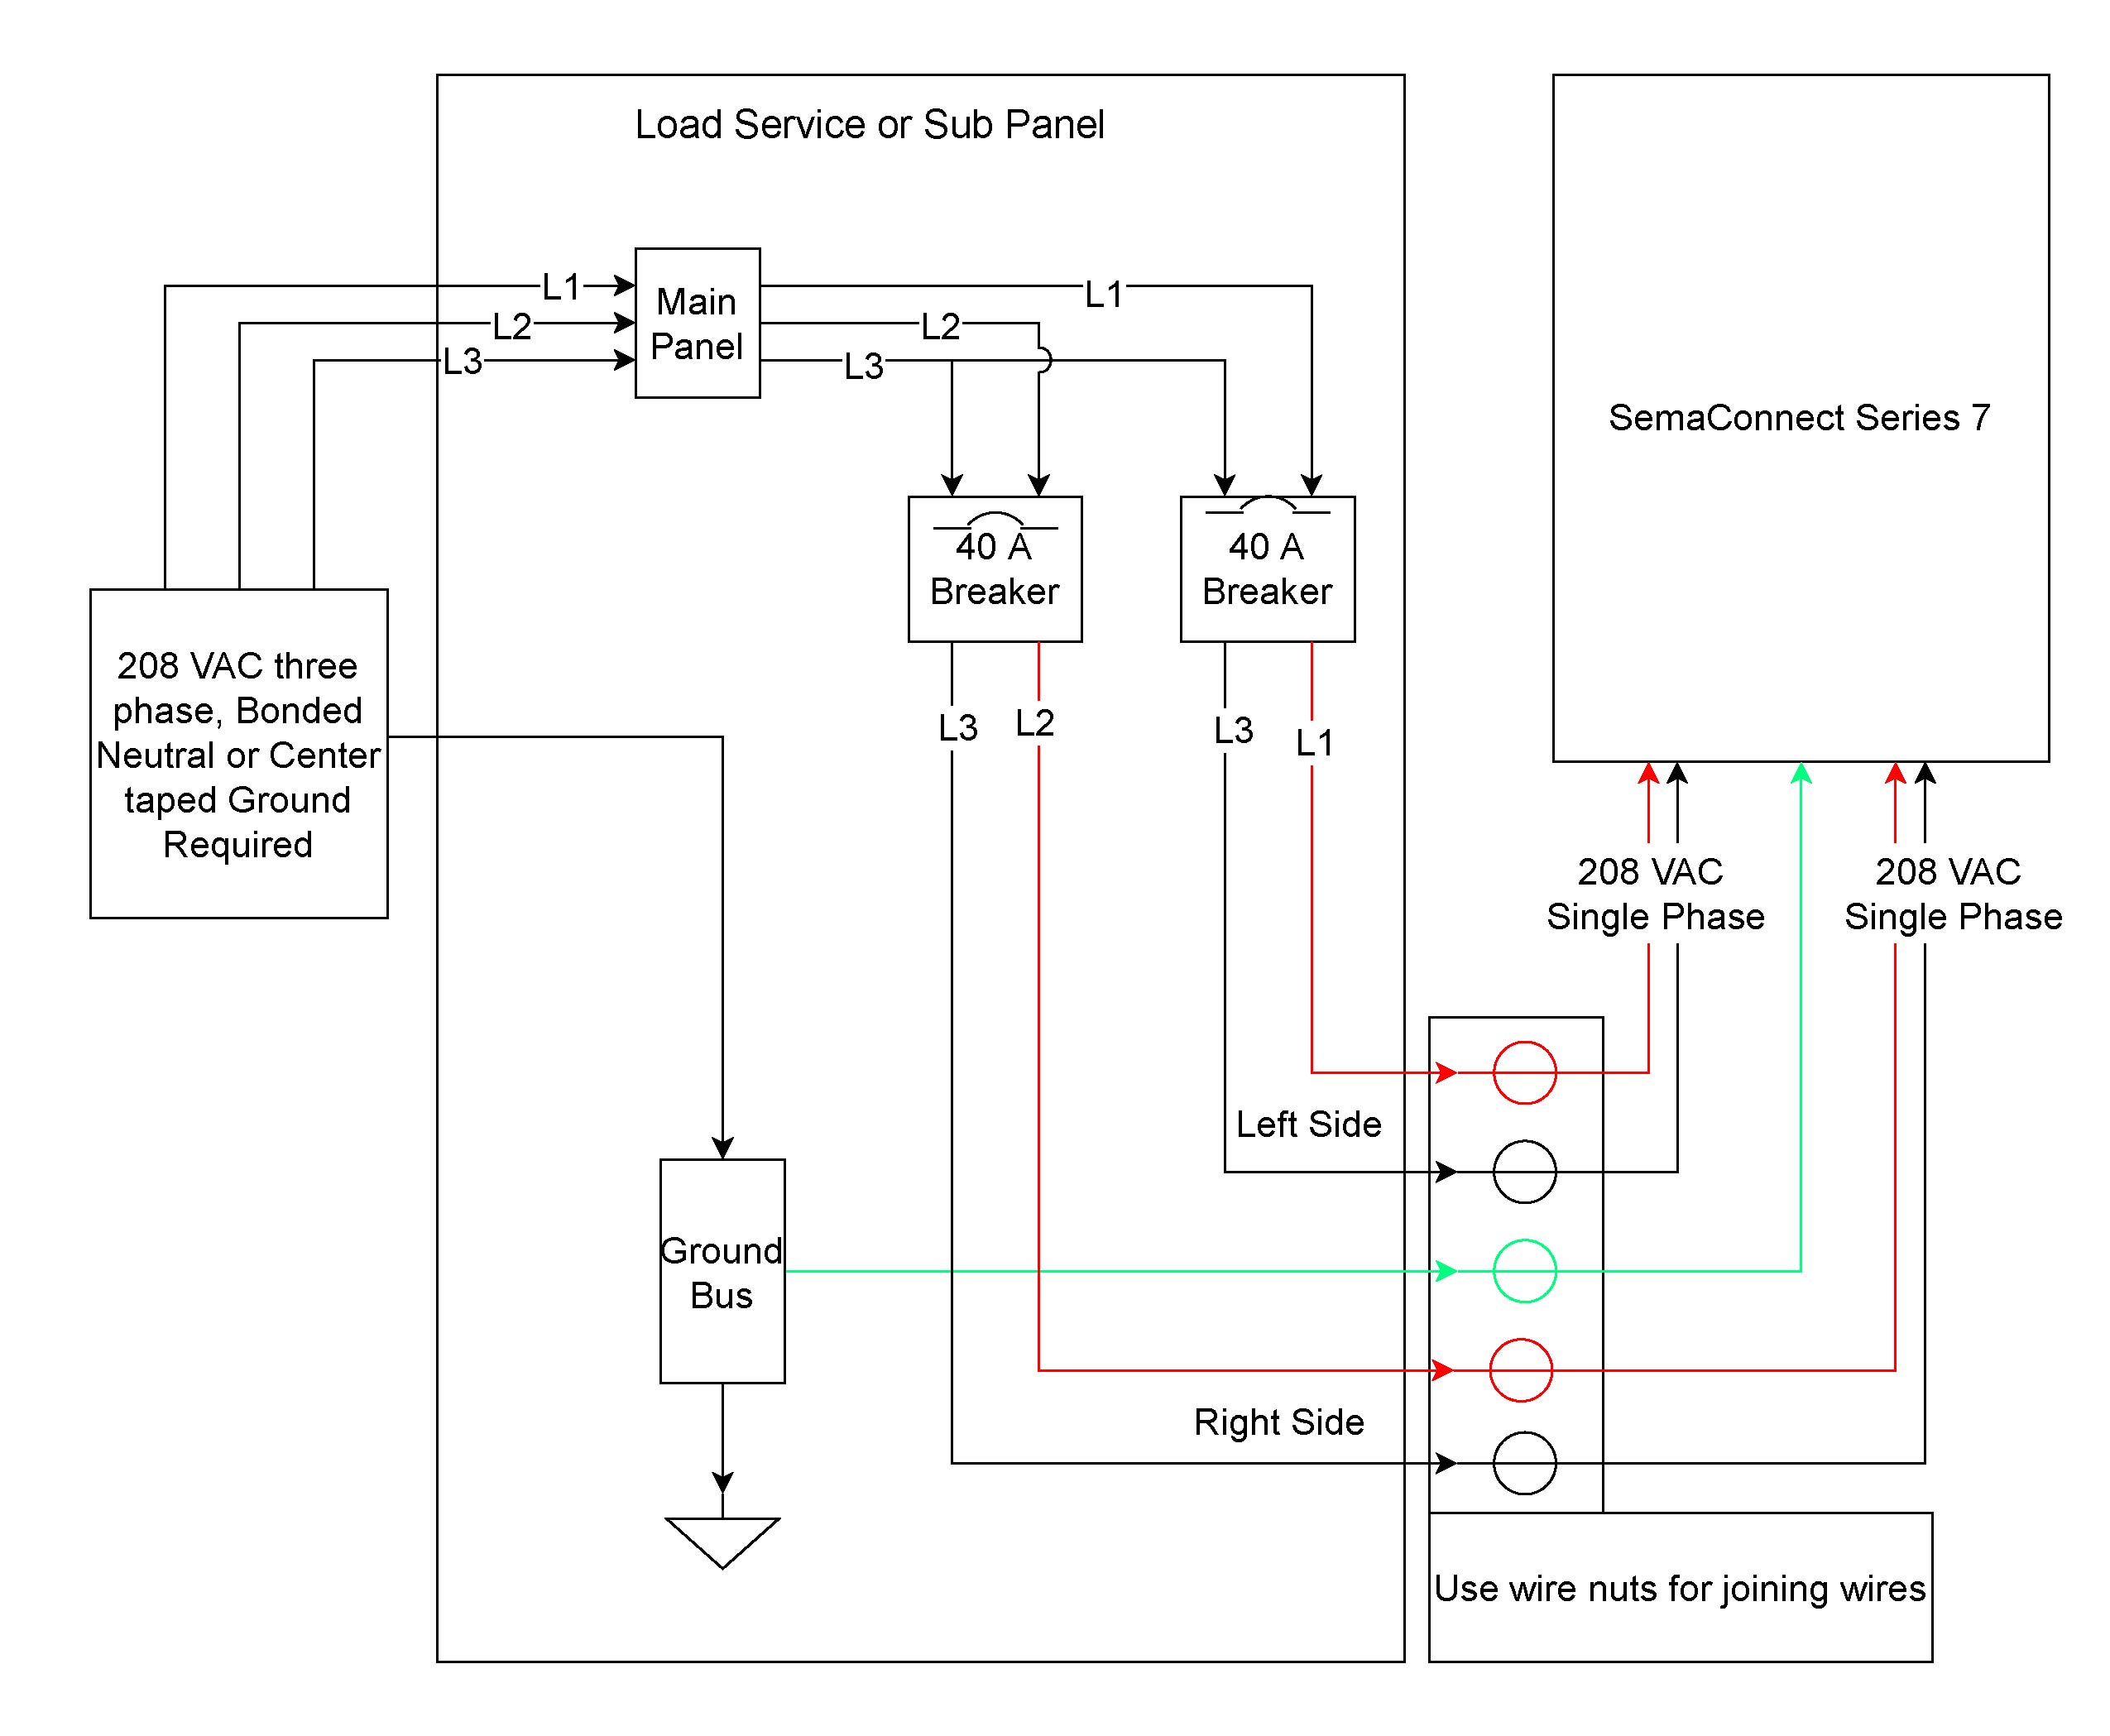 wiring diagram for a ge ro airconditioner model #asw18dls1